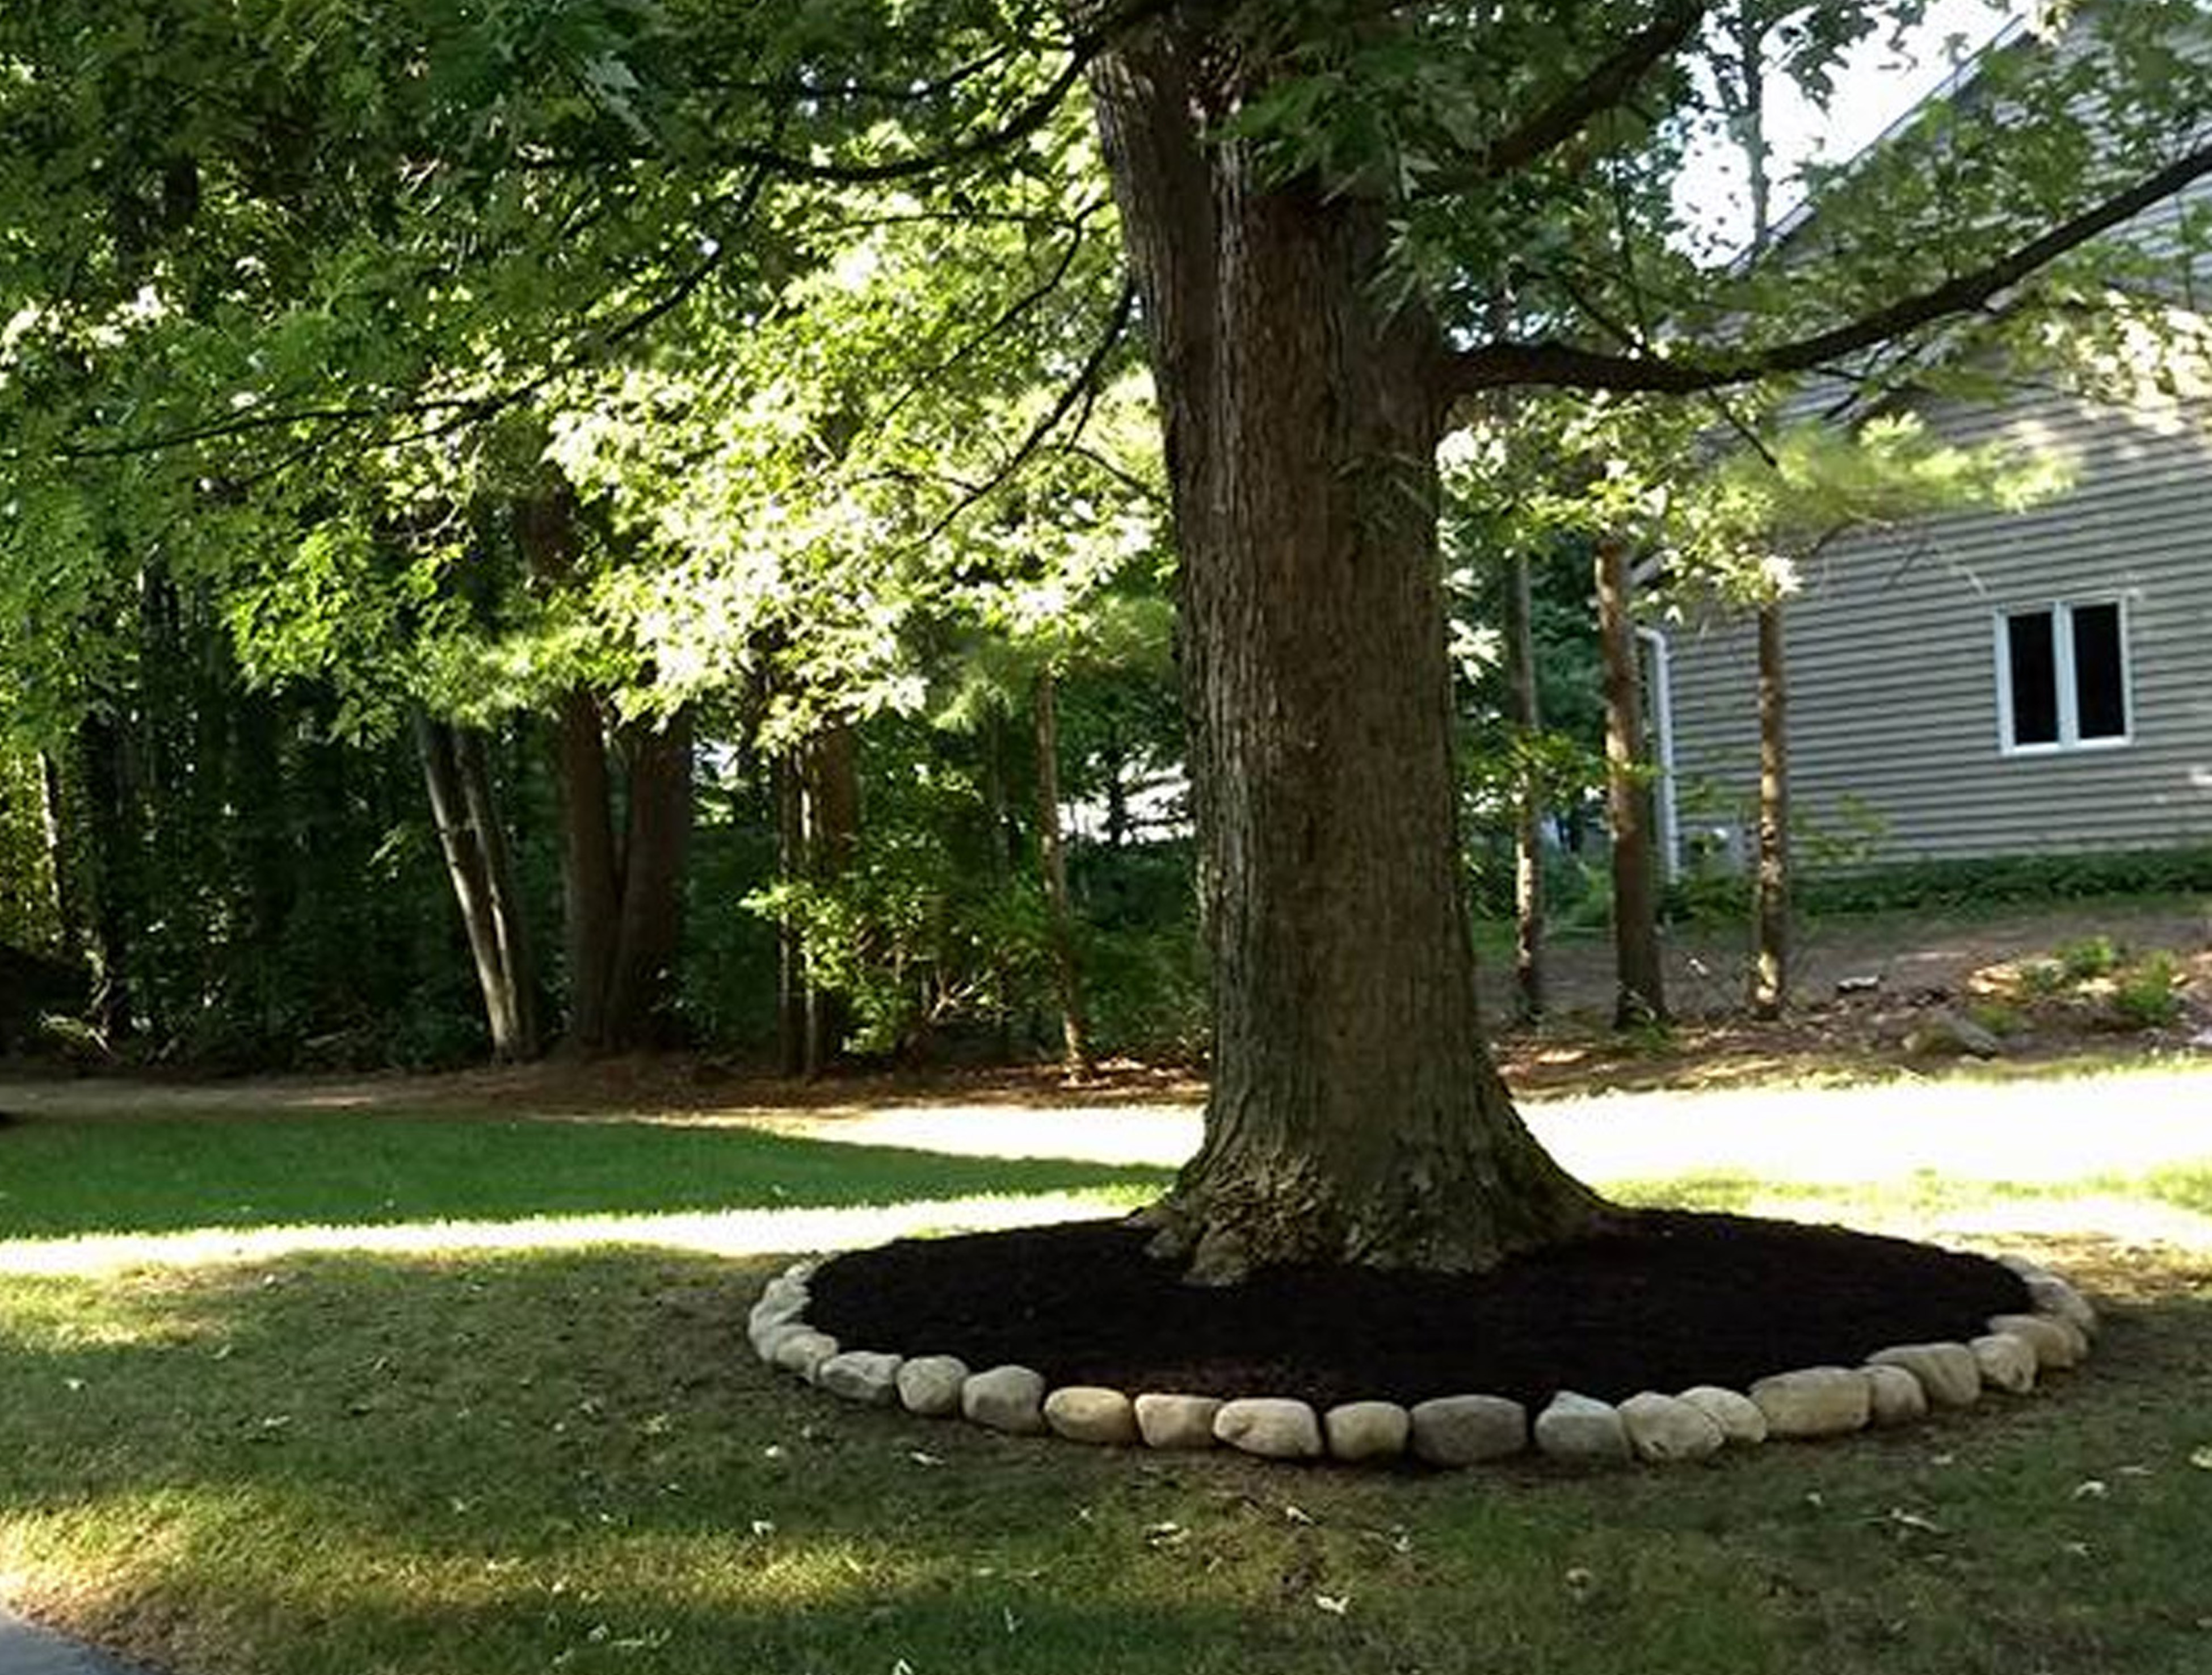 The newly completed ring of stone edging around a large tree with fresh mulch